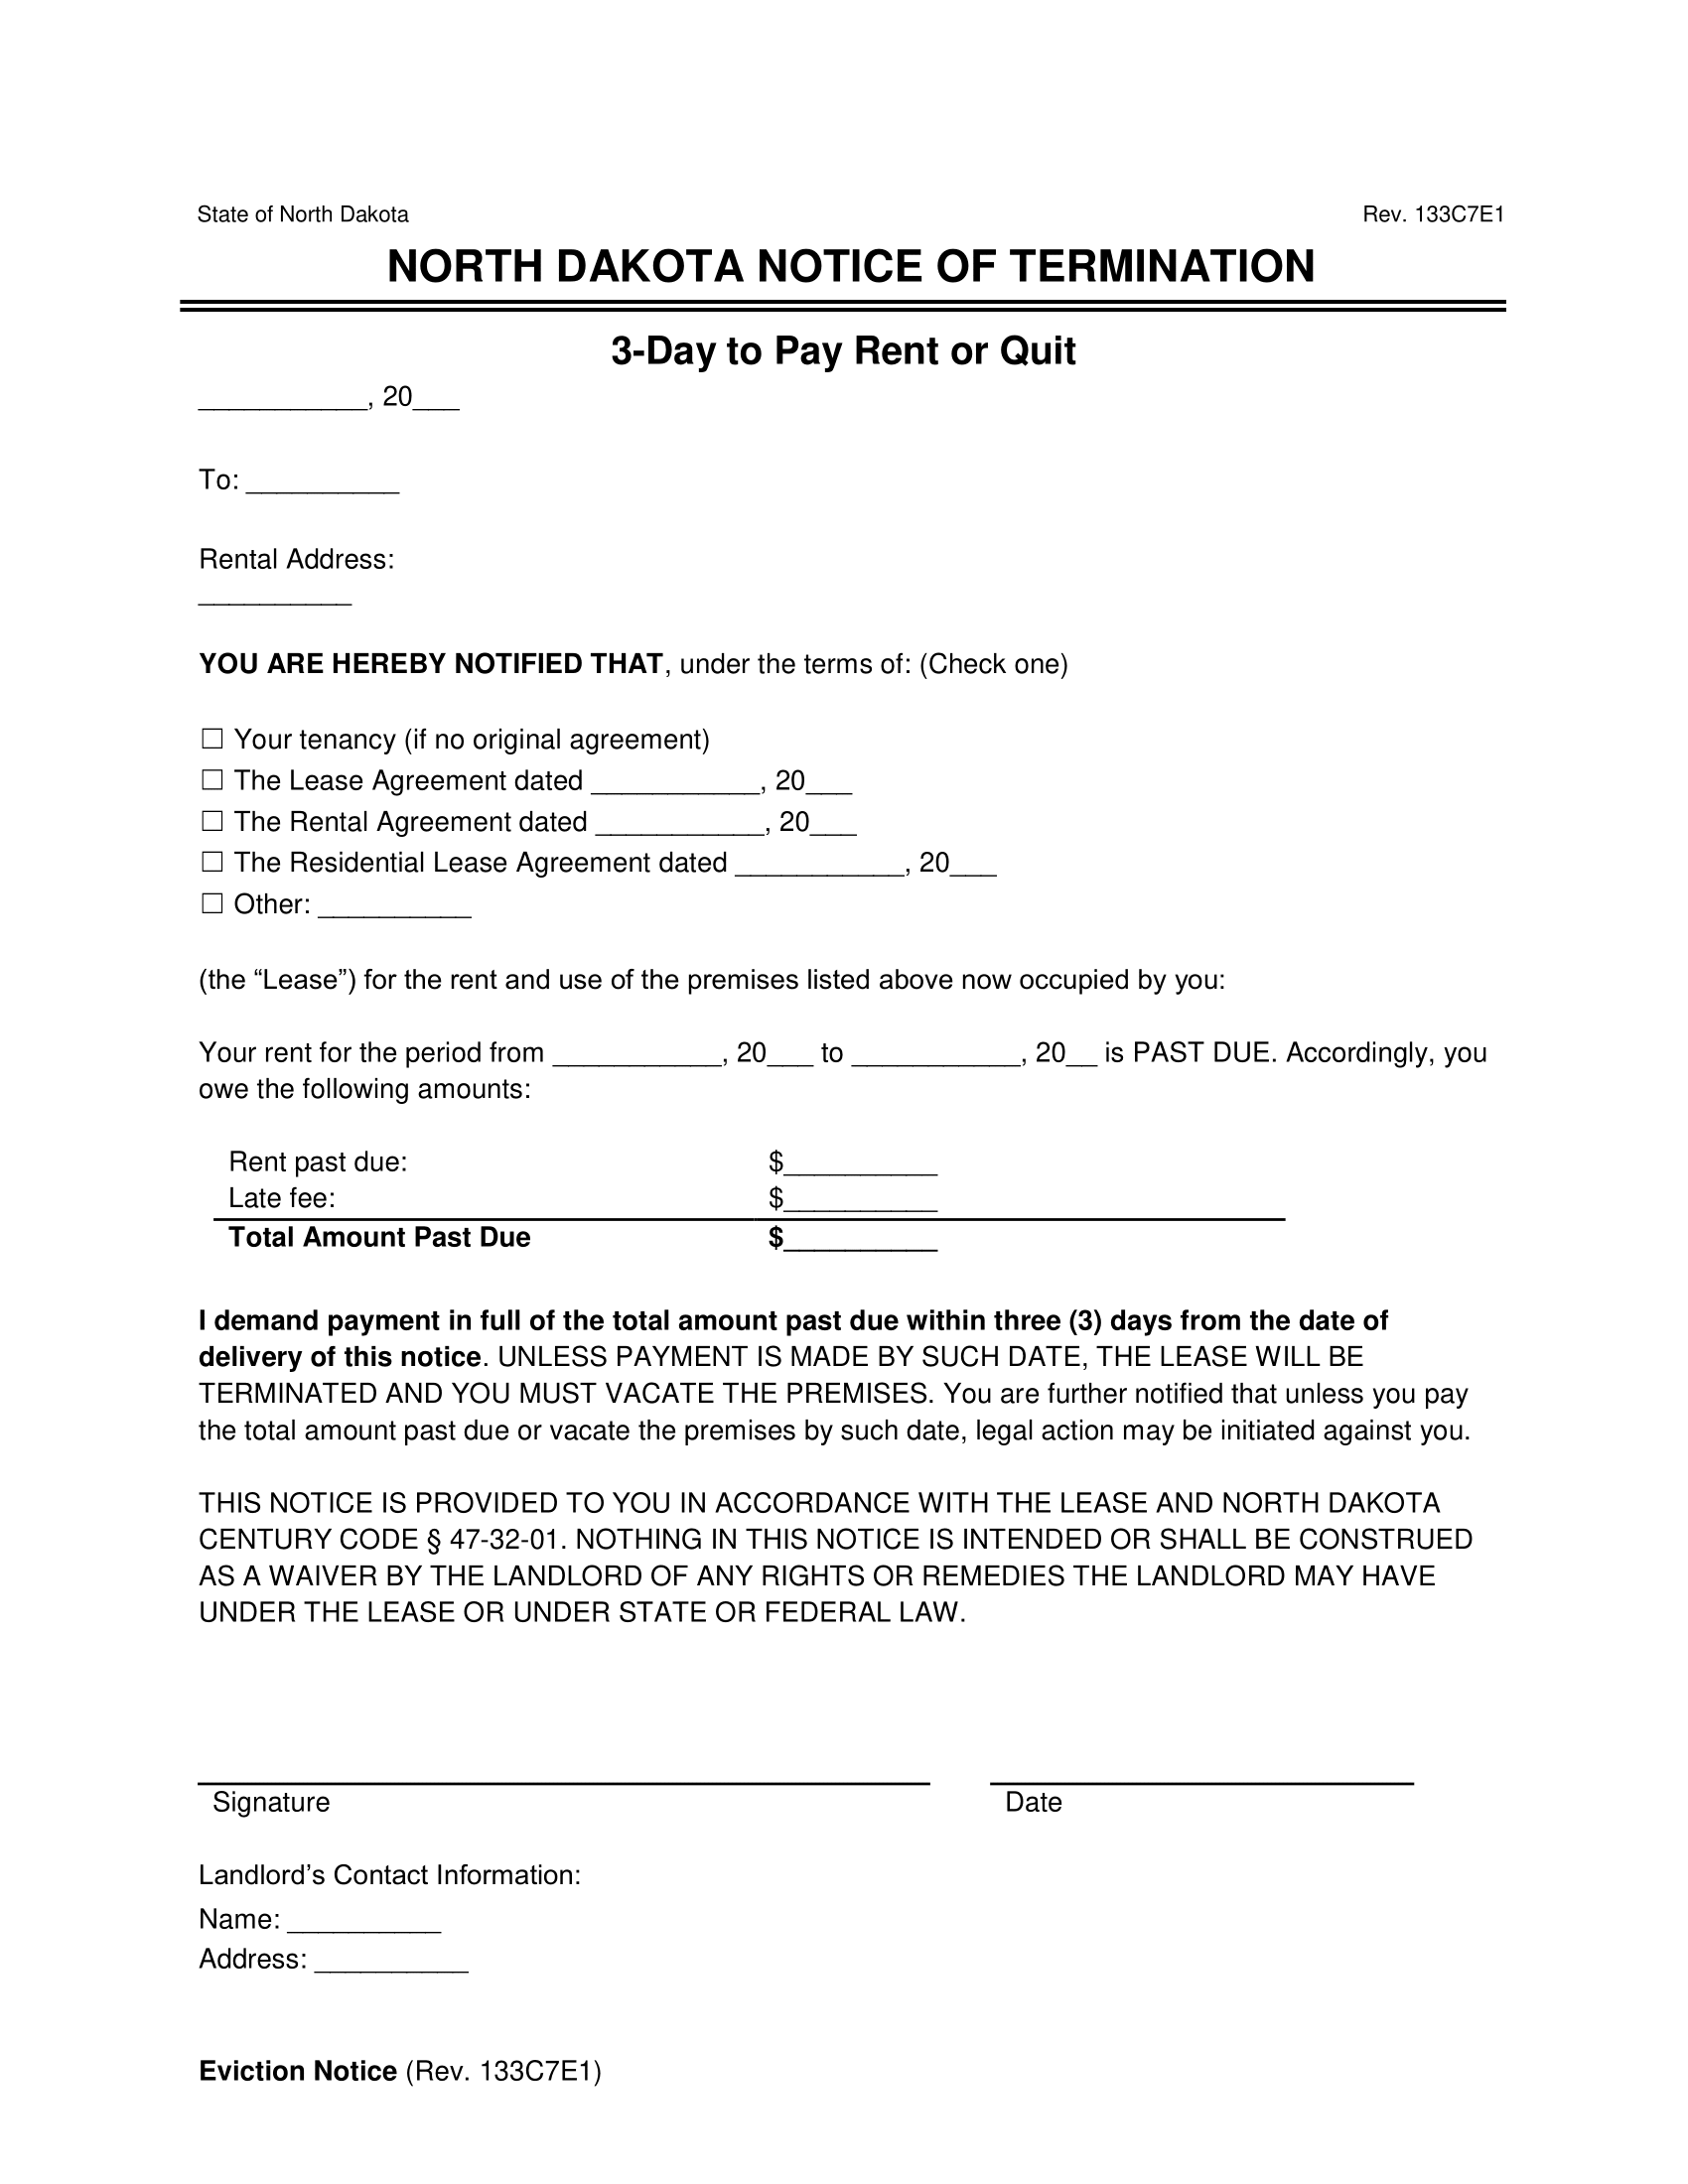 North Dakota 3-Day Notice to Quit | Non-Payment of Rent